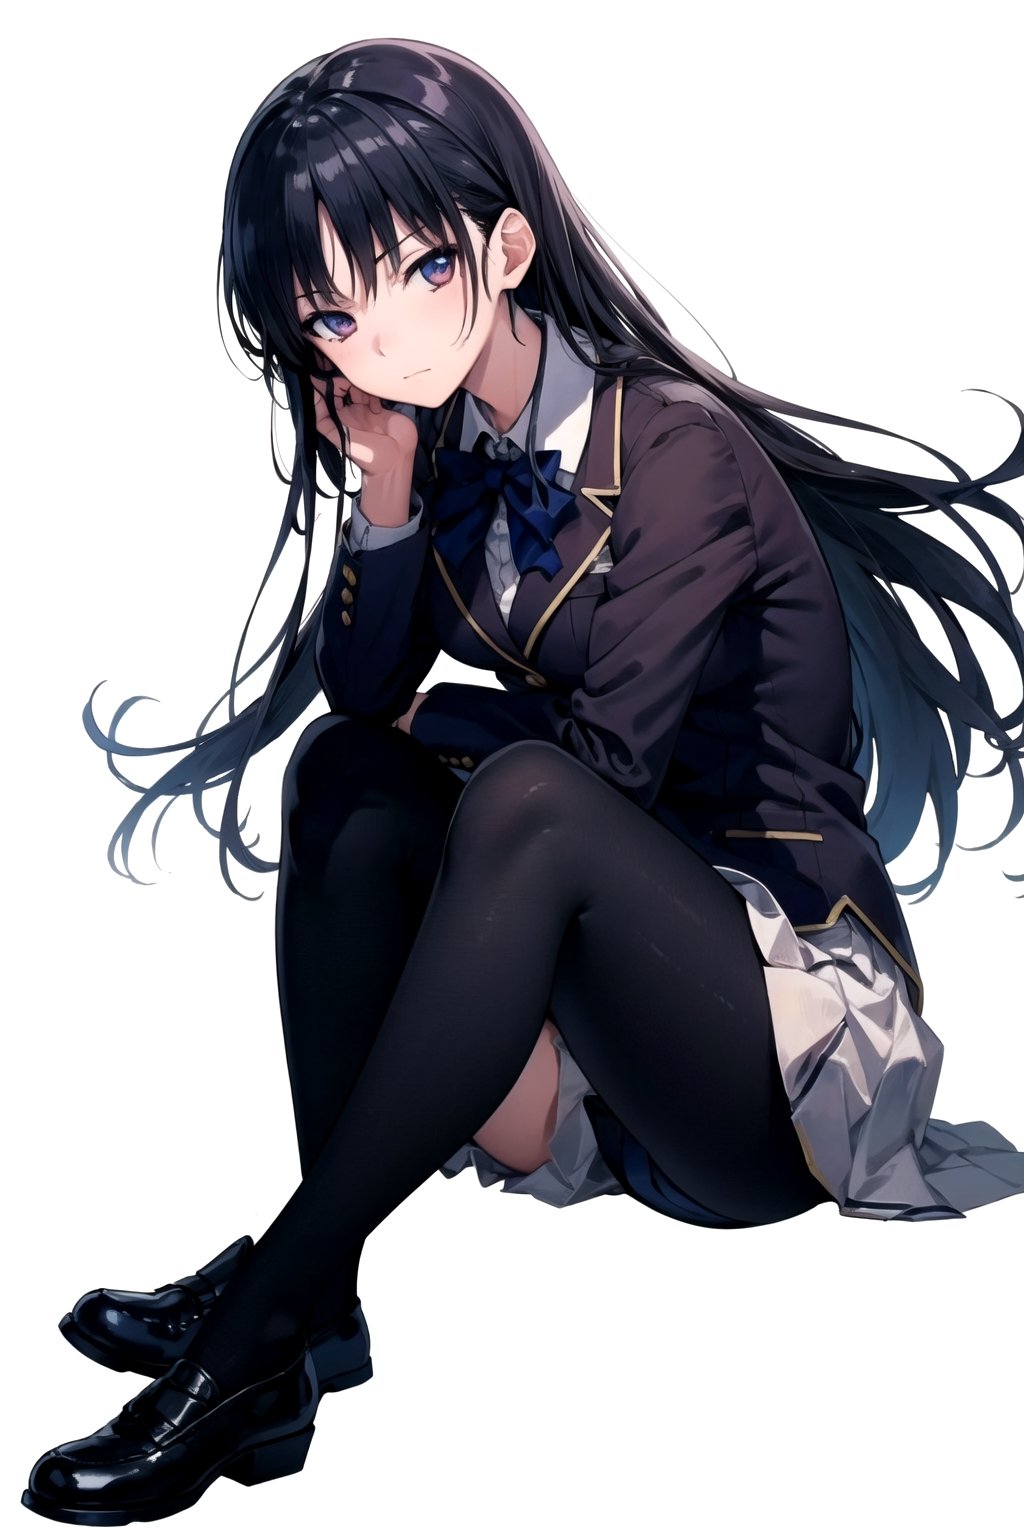 //Quality,
masterpiece, best quality
,//Character,
1girl, solo
,//Fashion,
,//Background,
white_background, simple_background
,//Others,
,Suzune Horikita, school_uniform, full_body